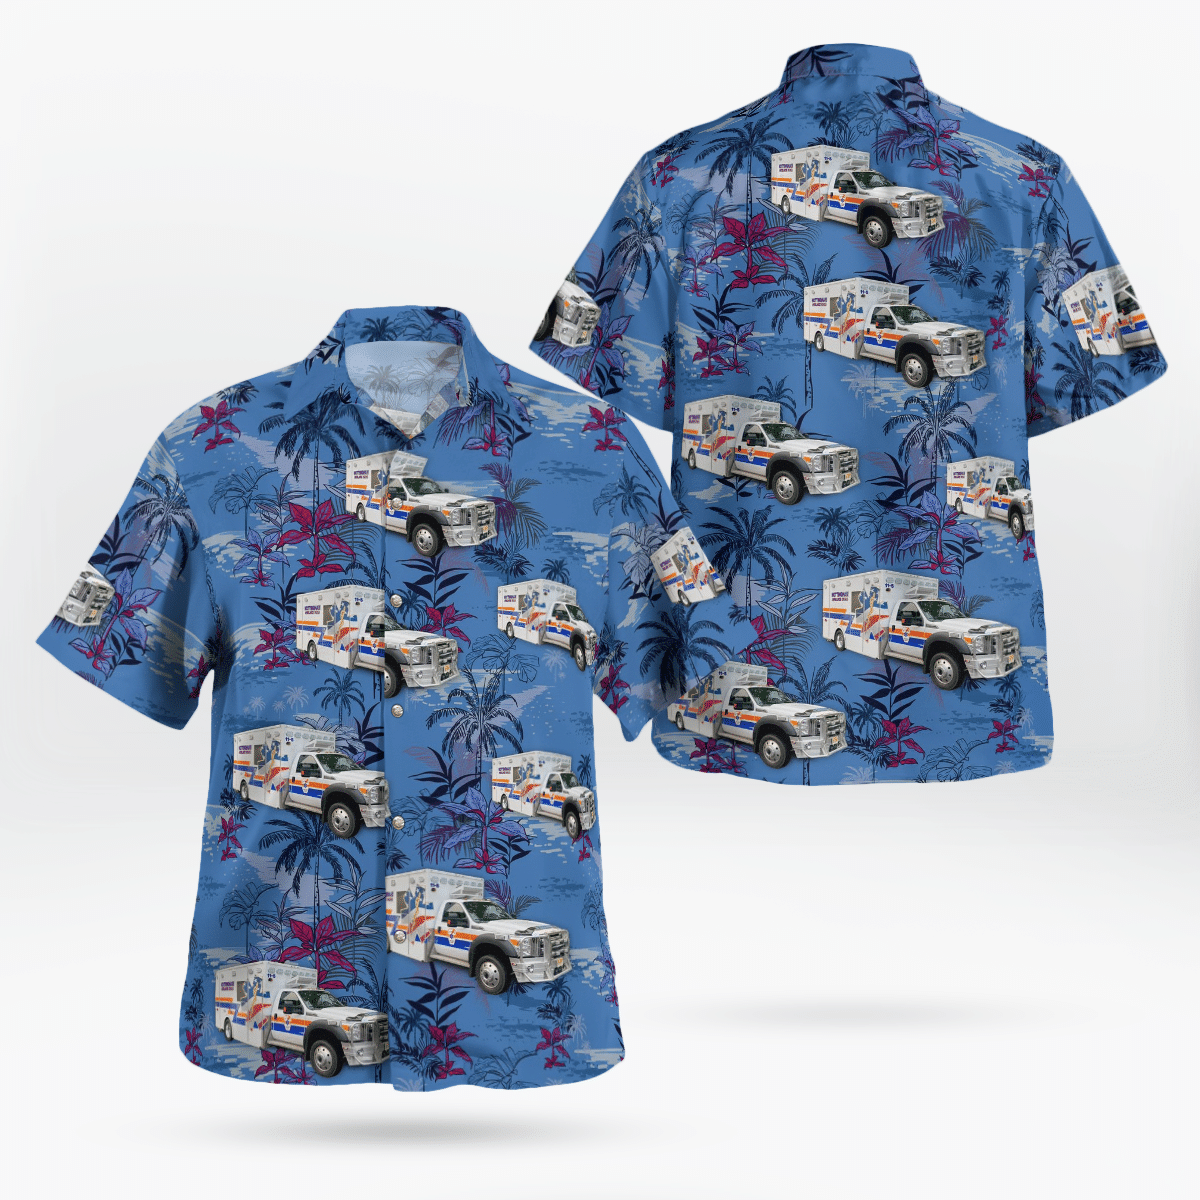 Shop now to find the perfect Hawaii Shirt for your hobby 161